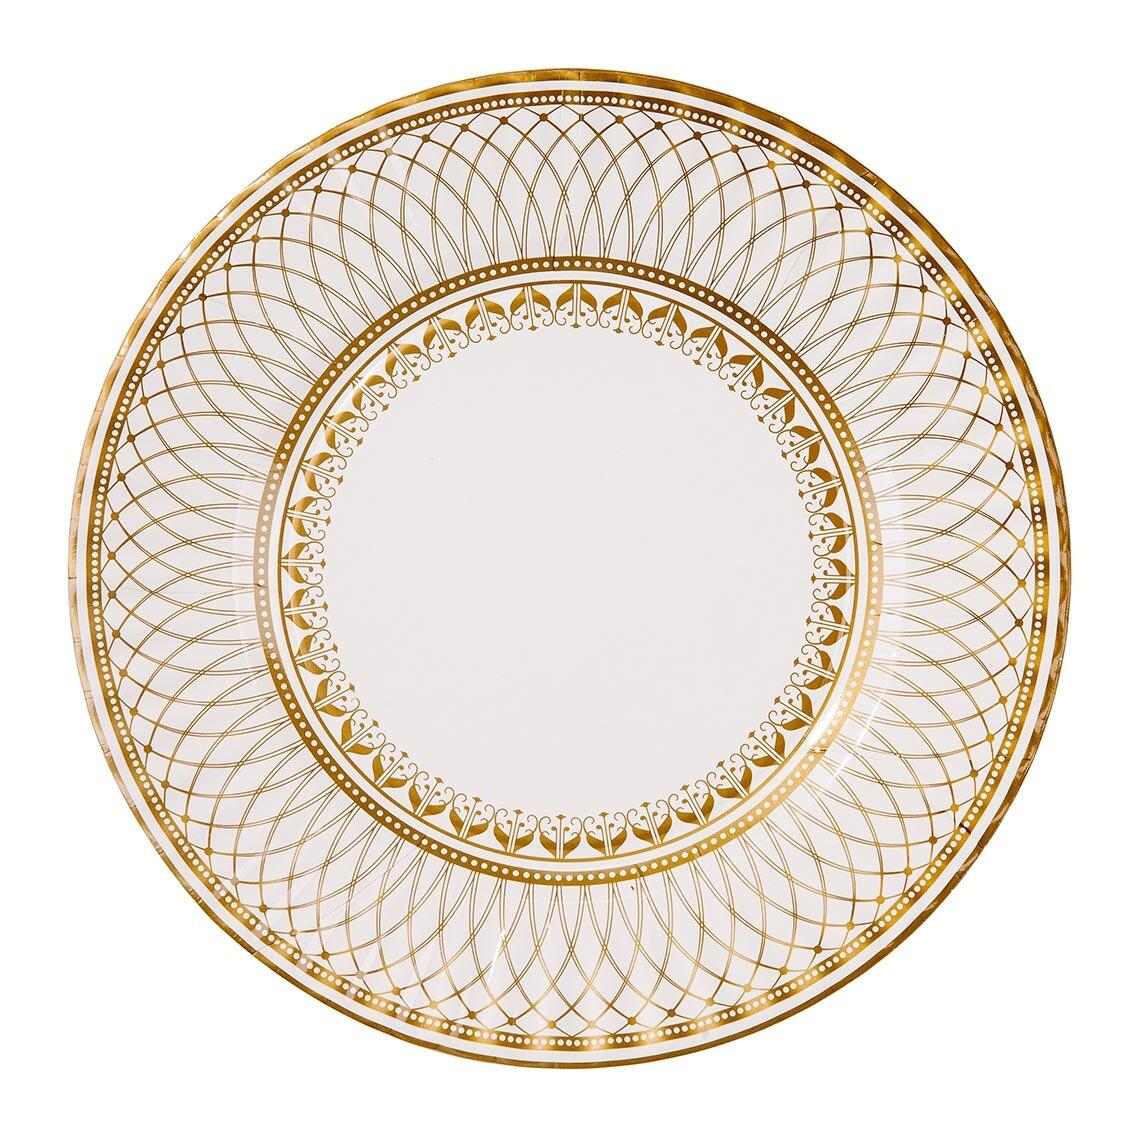 Luxurious porcelain-inspired disposable paper party plates